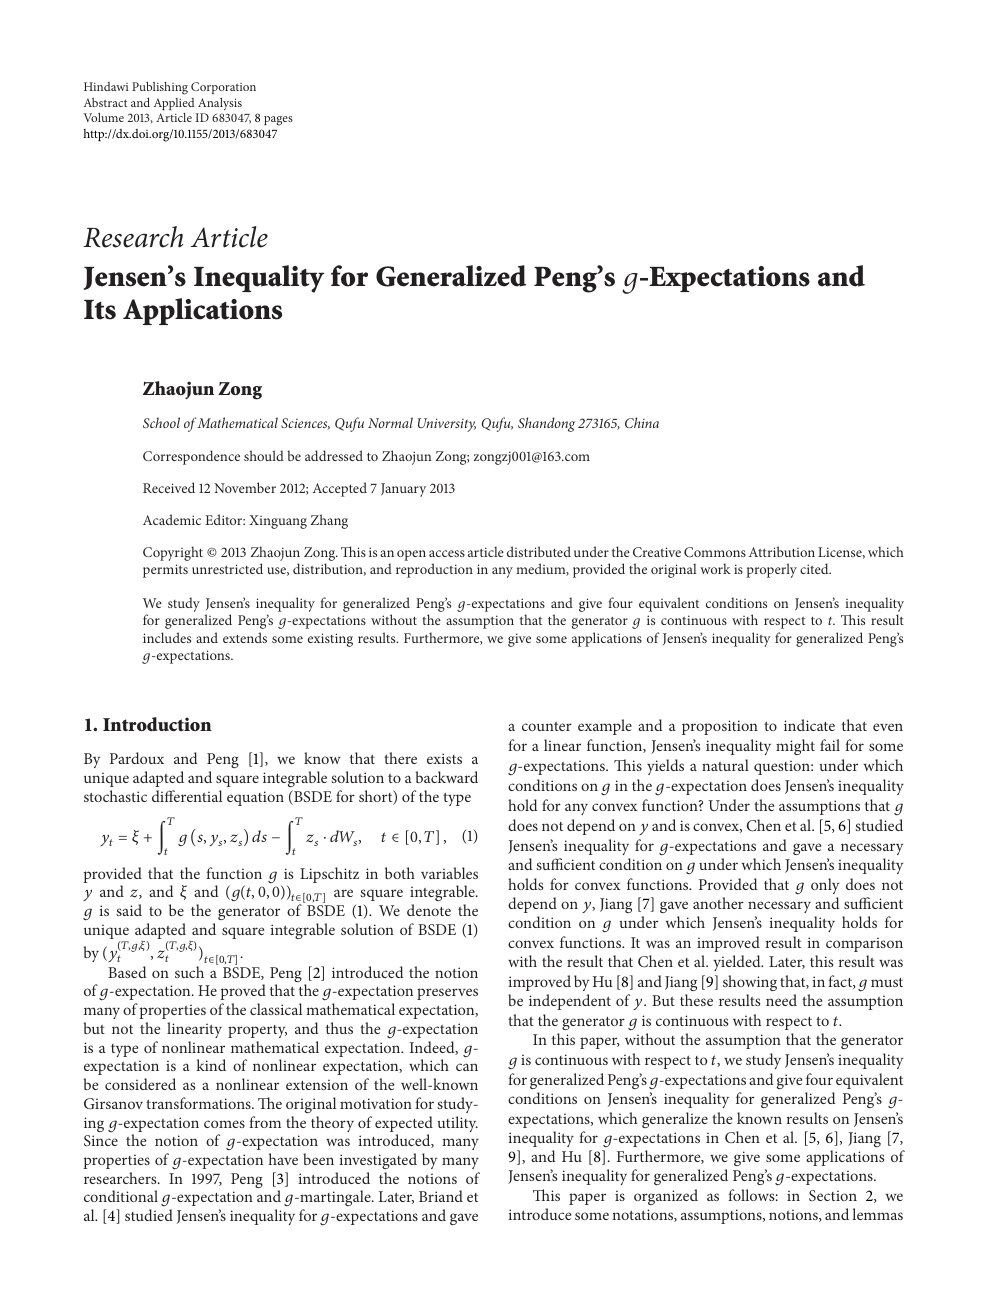 Jensen S Inequality For Generalized Peng S Expectations And Its Applications Topic Of Research Paper In Mathematics Download Scholarly Article Pdf And Read For Free On Cyberleninka Open Science Hub